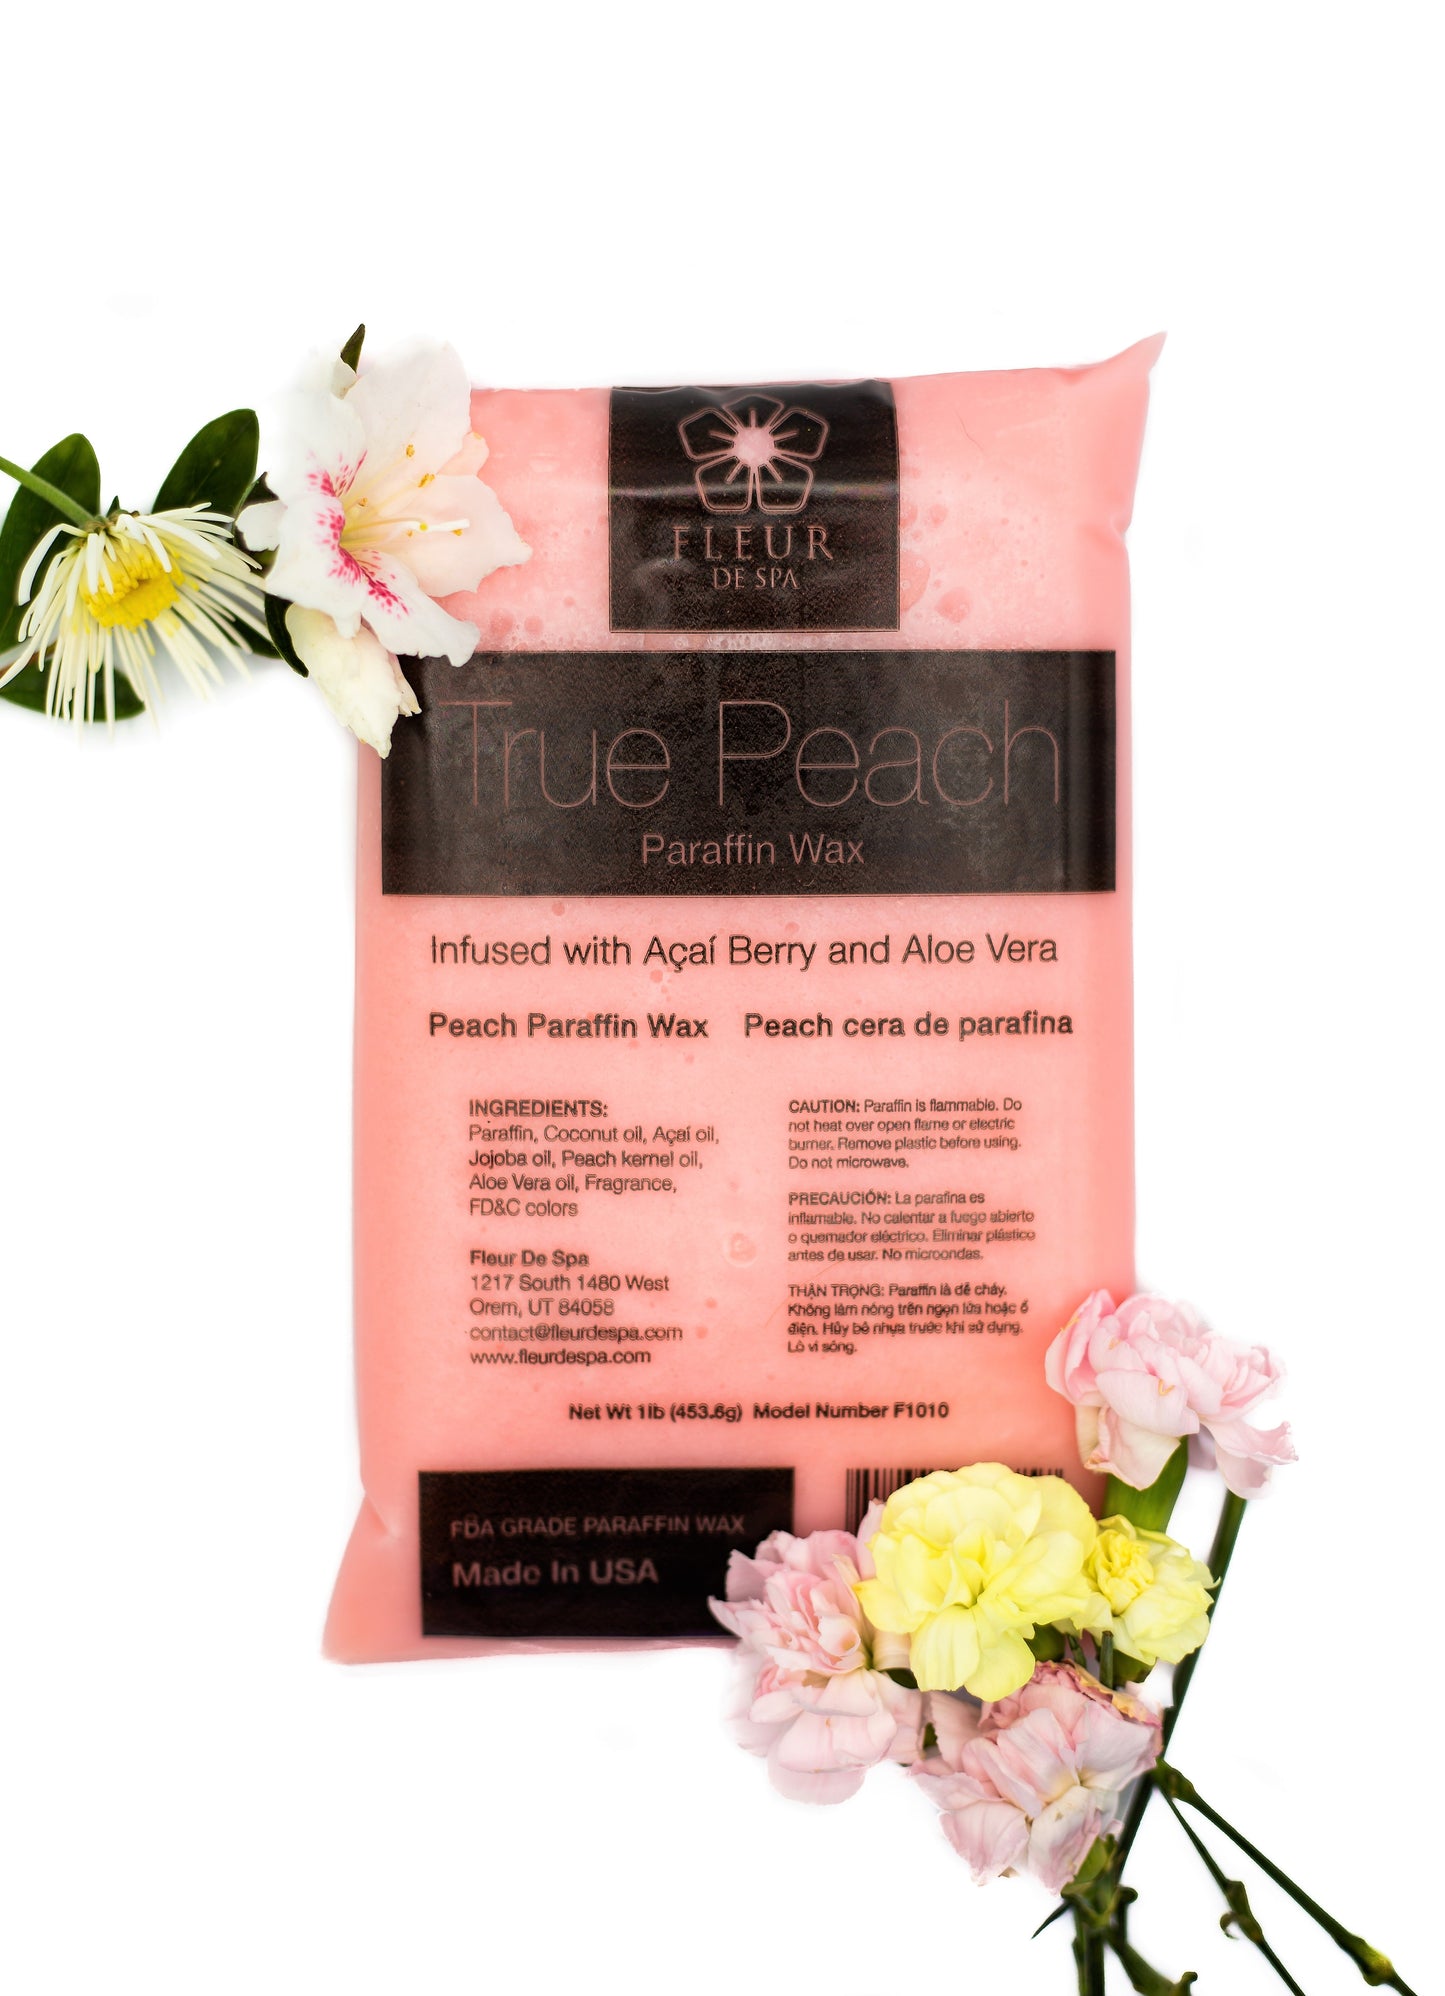 Paraffin Wax Refill from Fleur De Spa - USA made Paraffin for hands and feet.